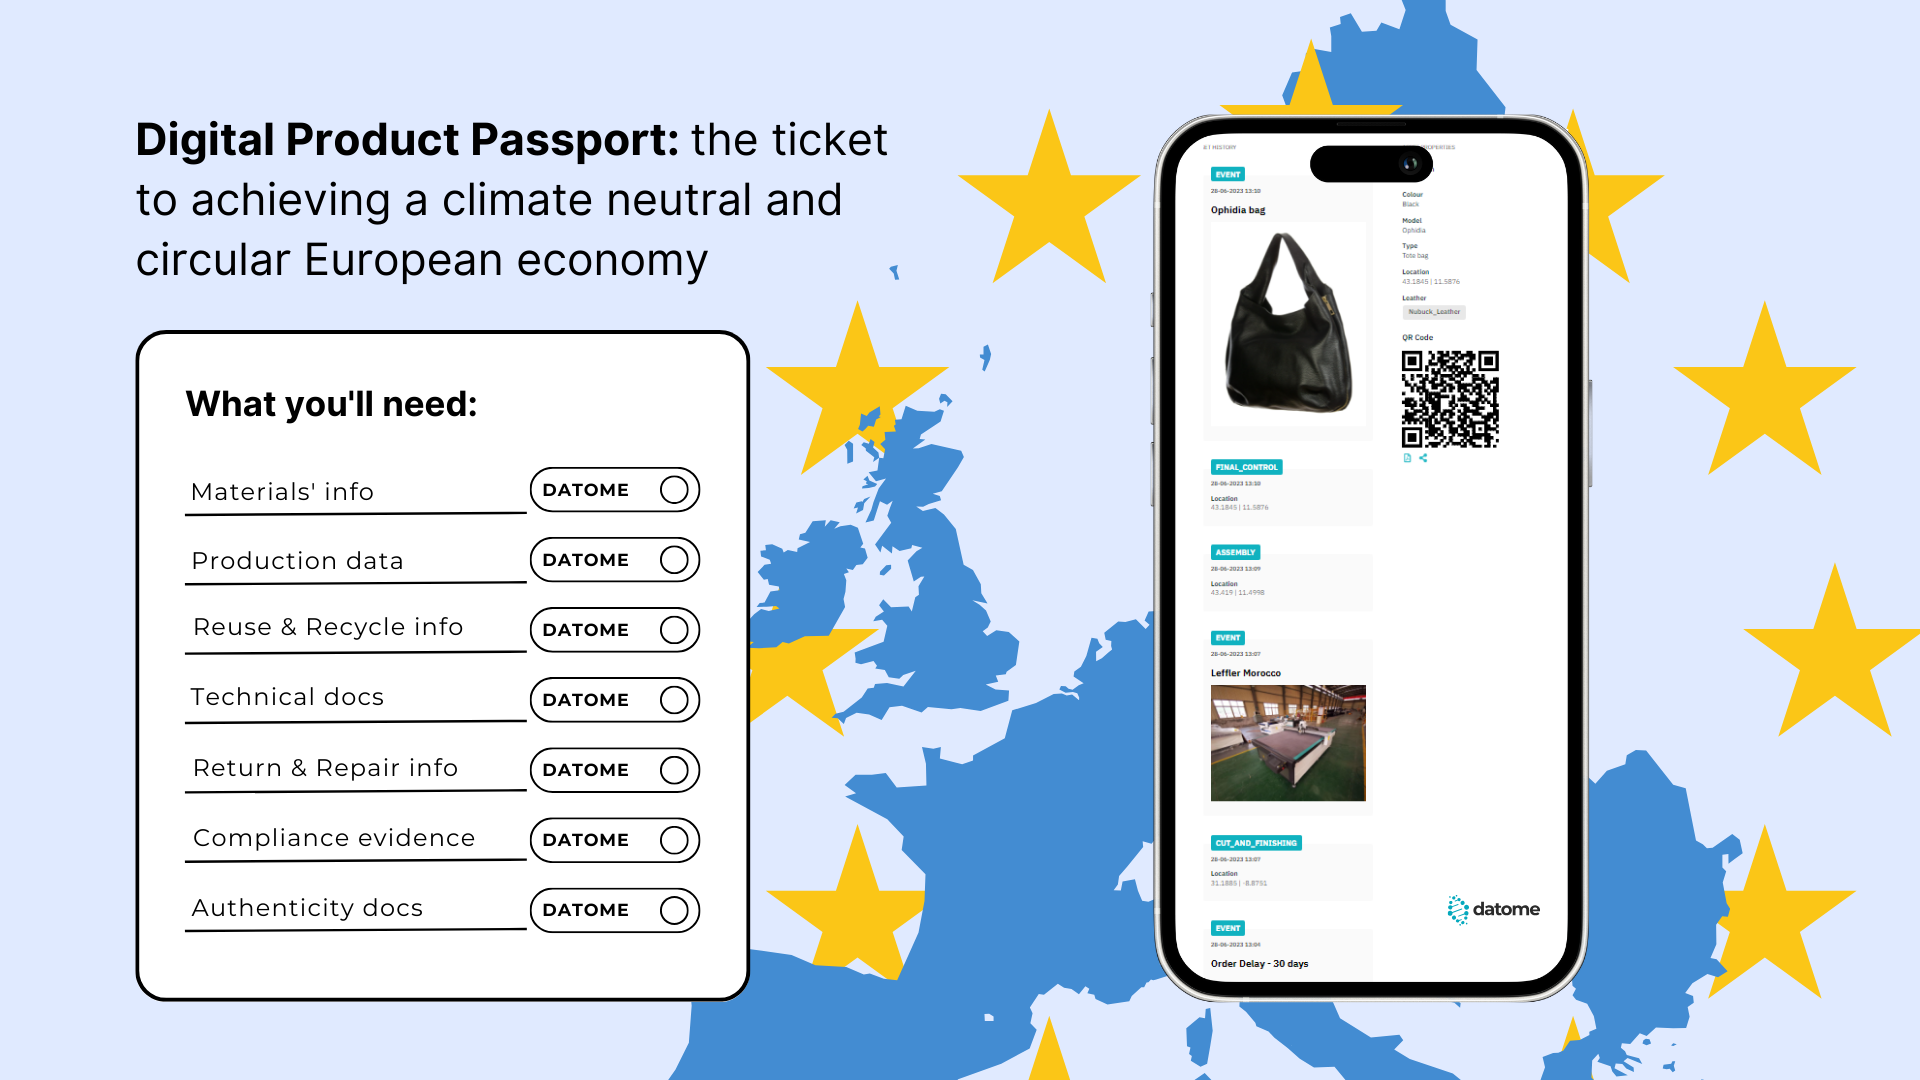 Datome for the European Digital Product Passport